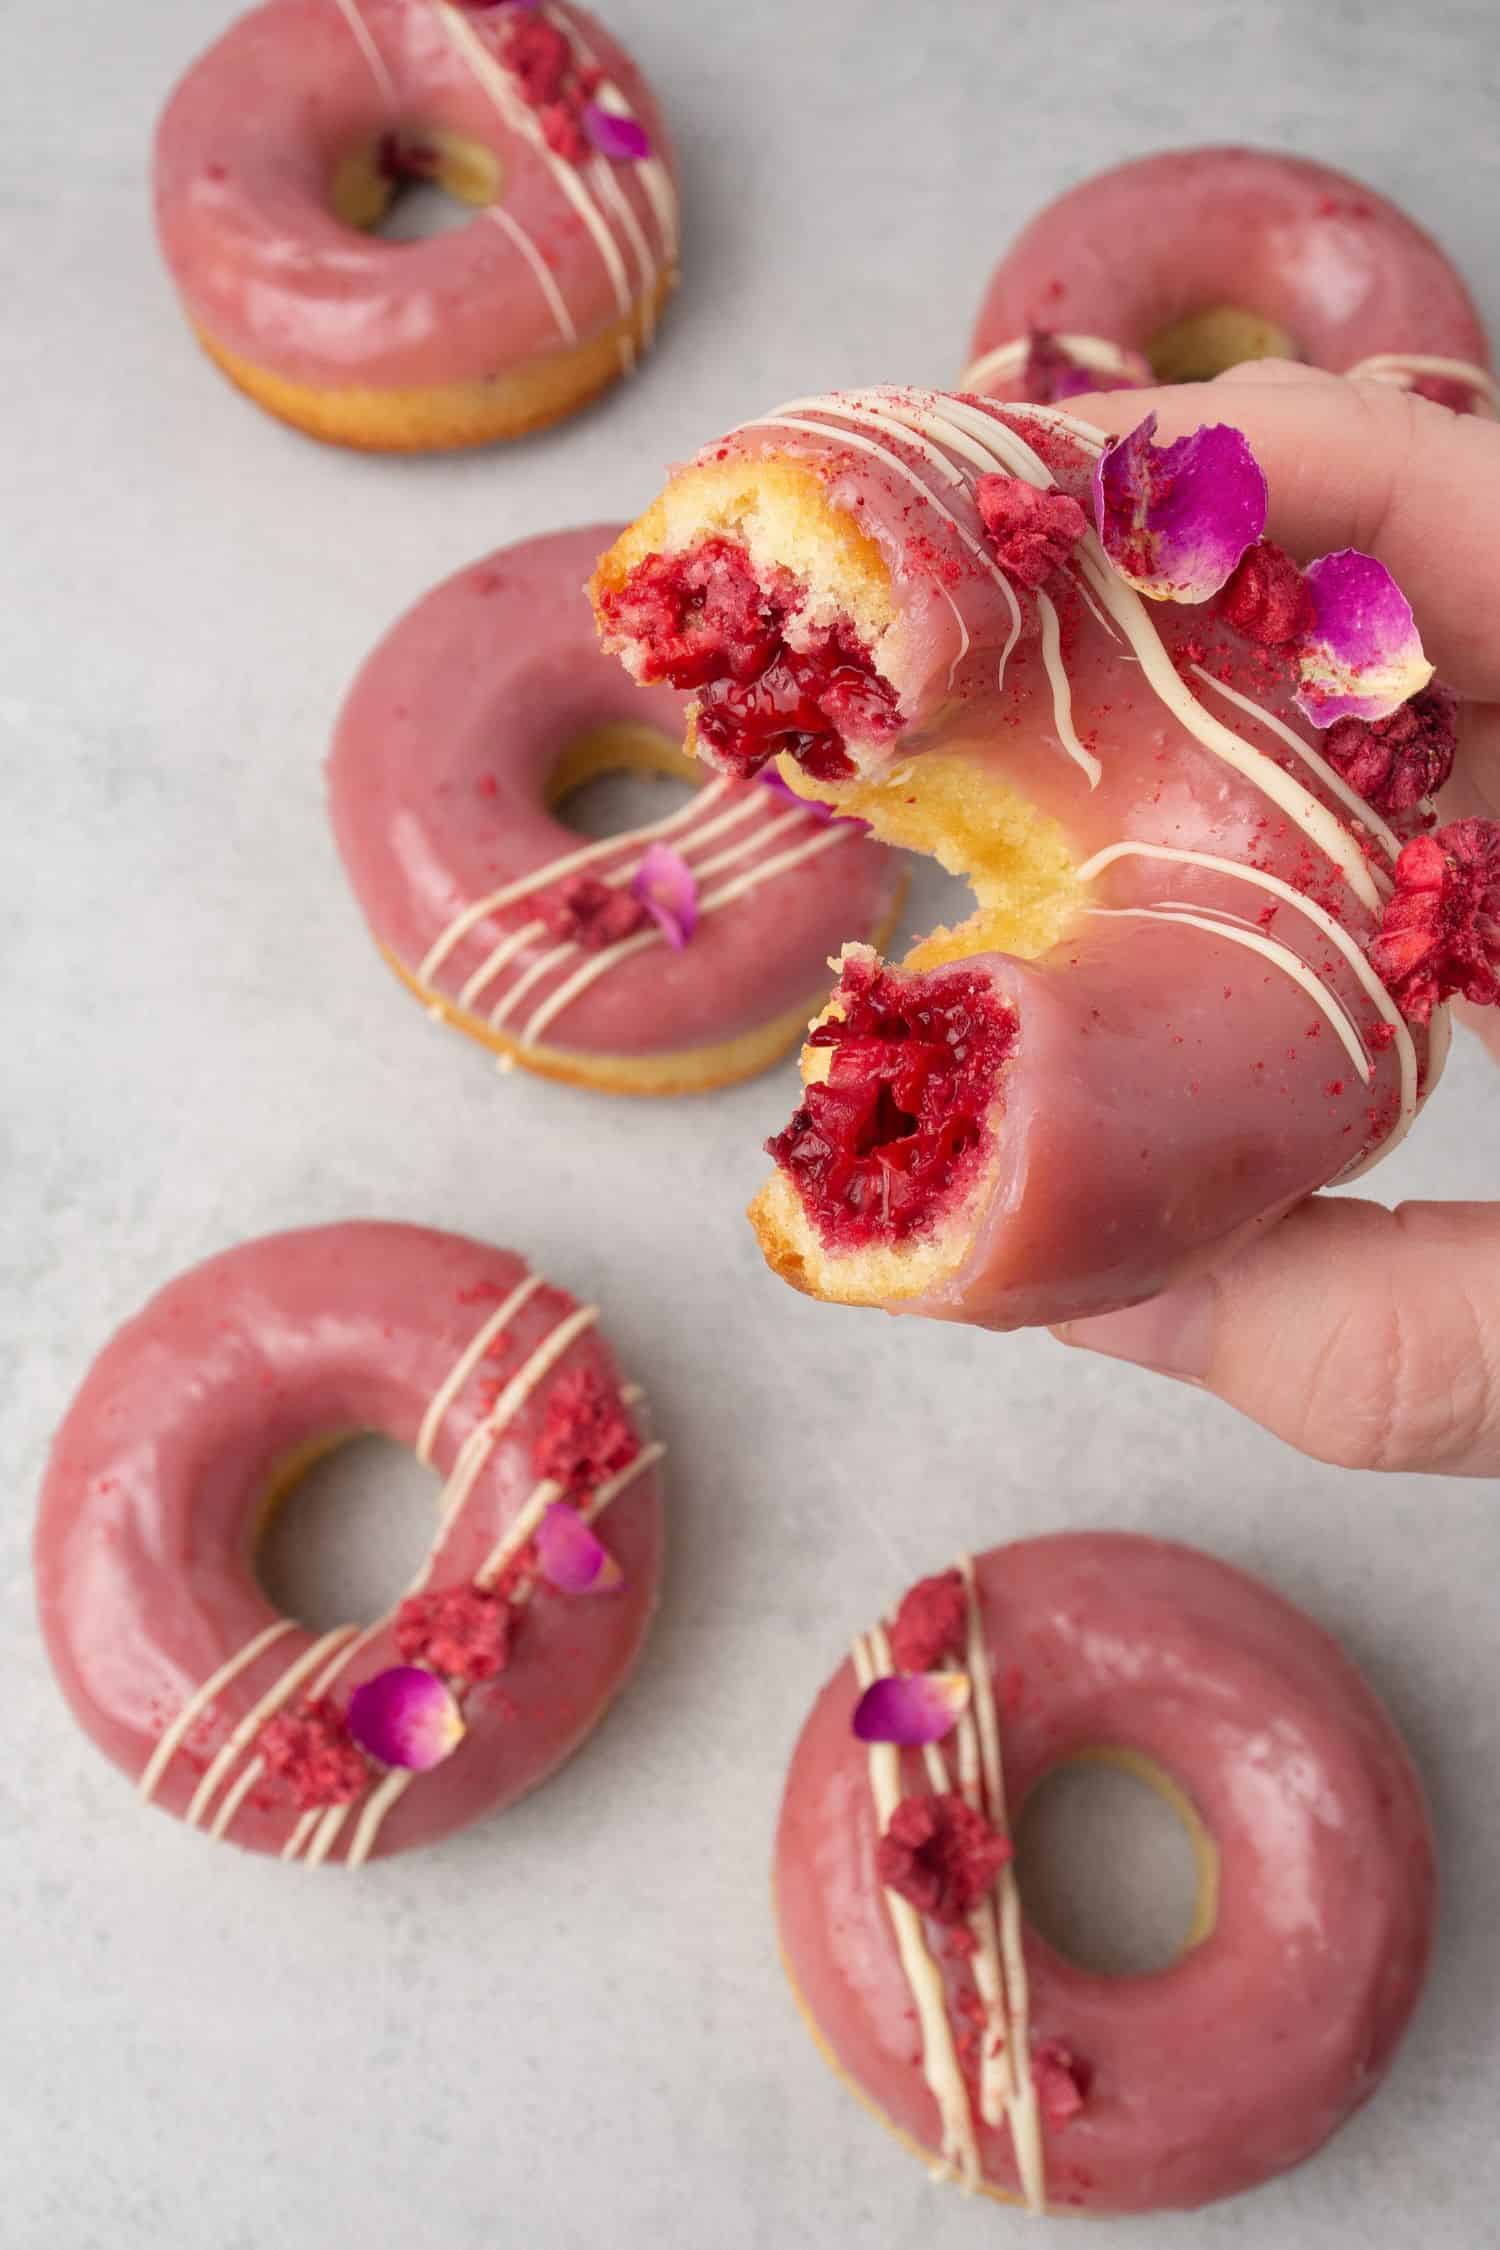 Baked donuts with raspberry and rosewater.